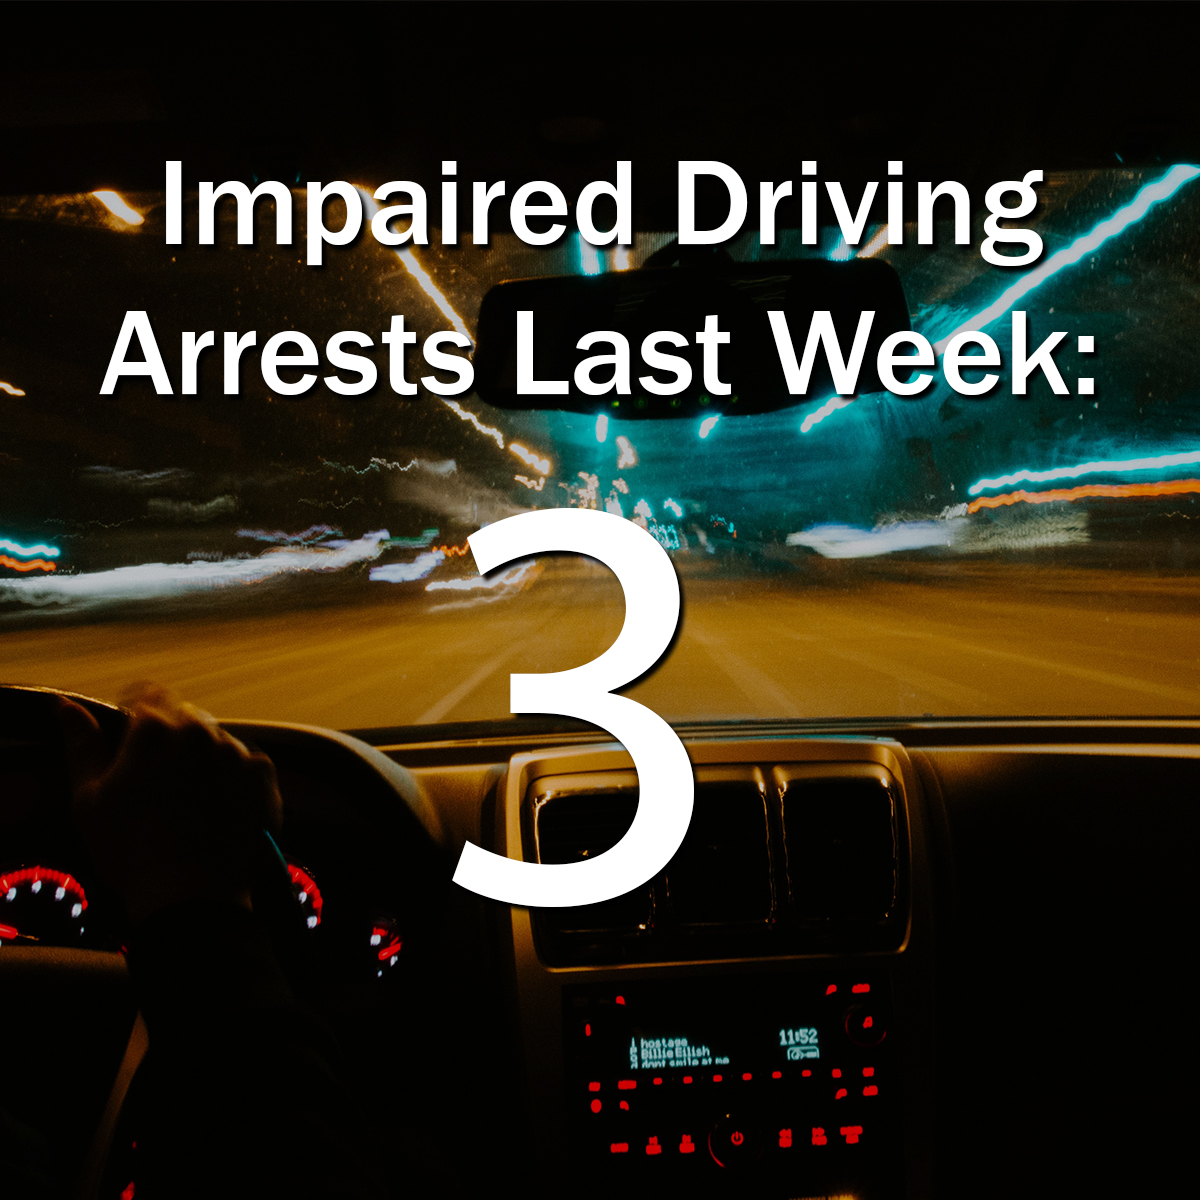 Criminal Impaired Driving Offences: Feb. 9 to Feb. 16